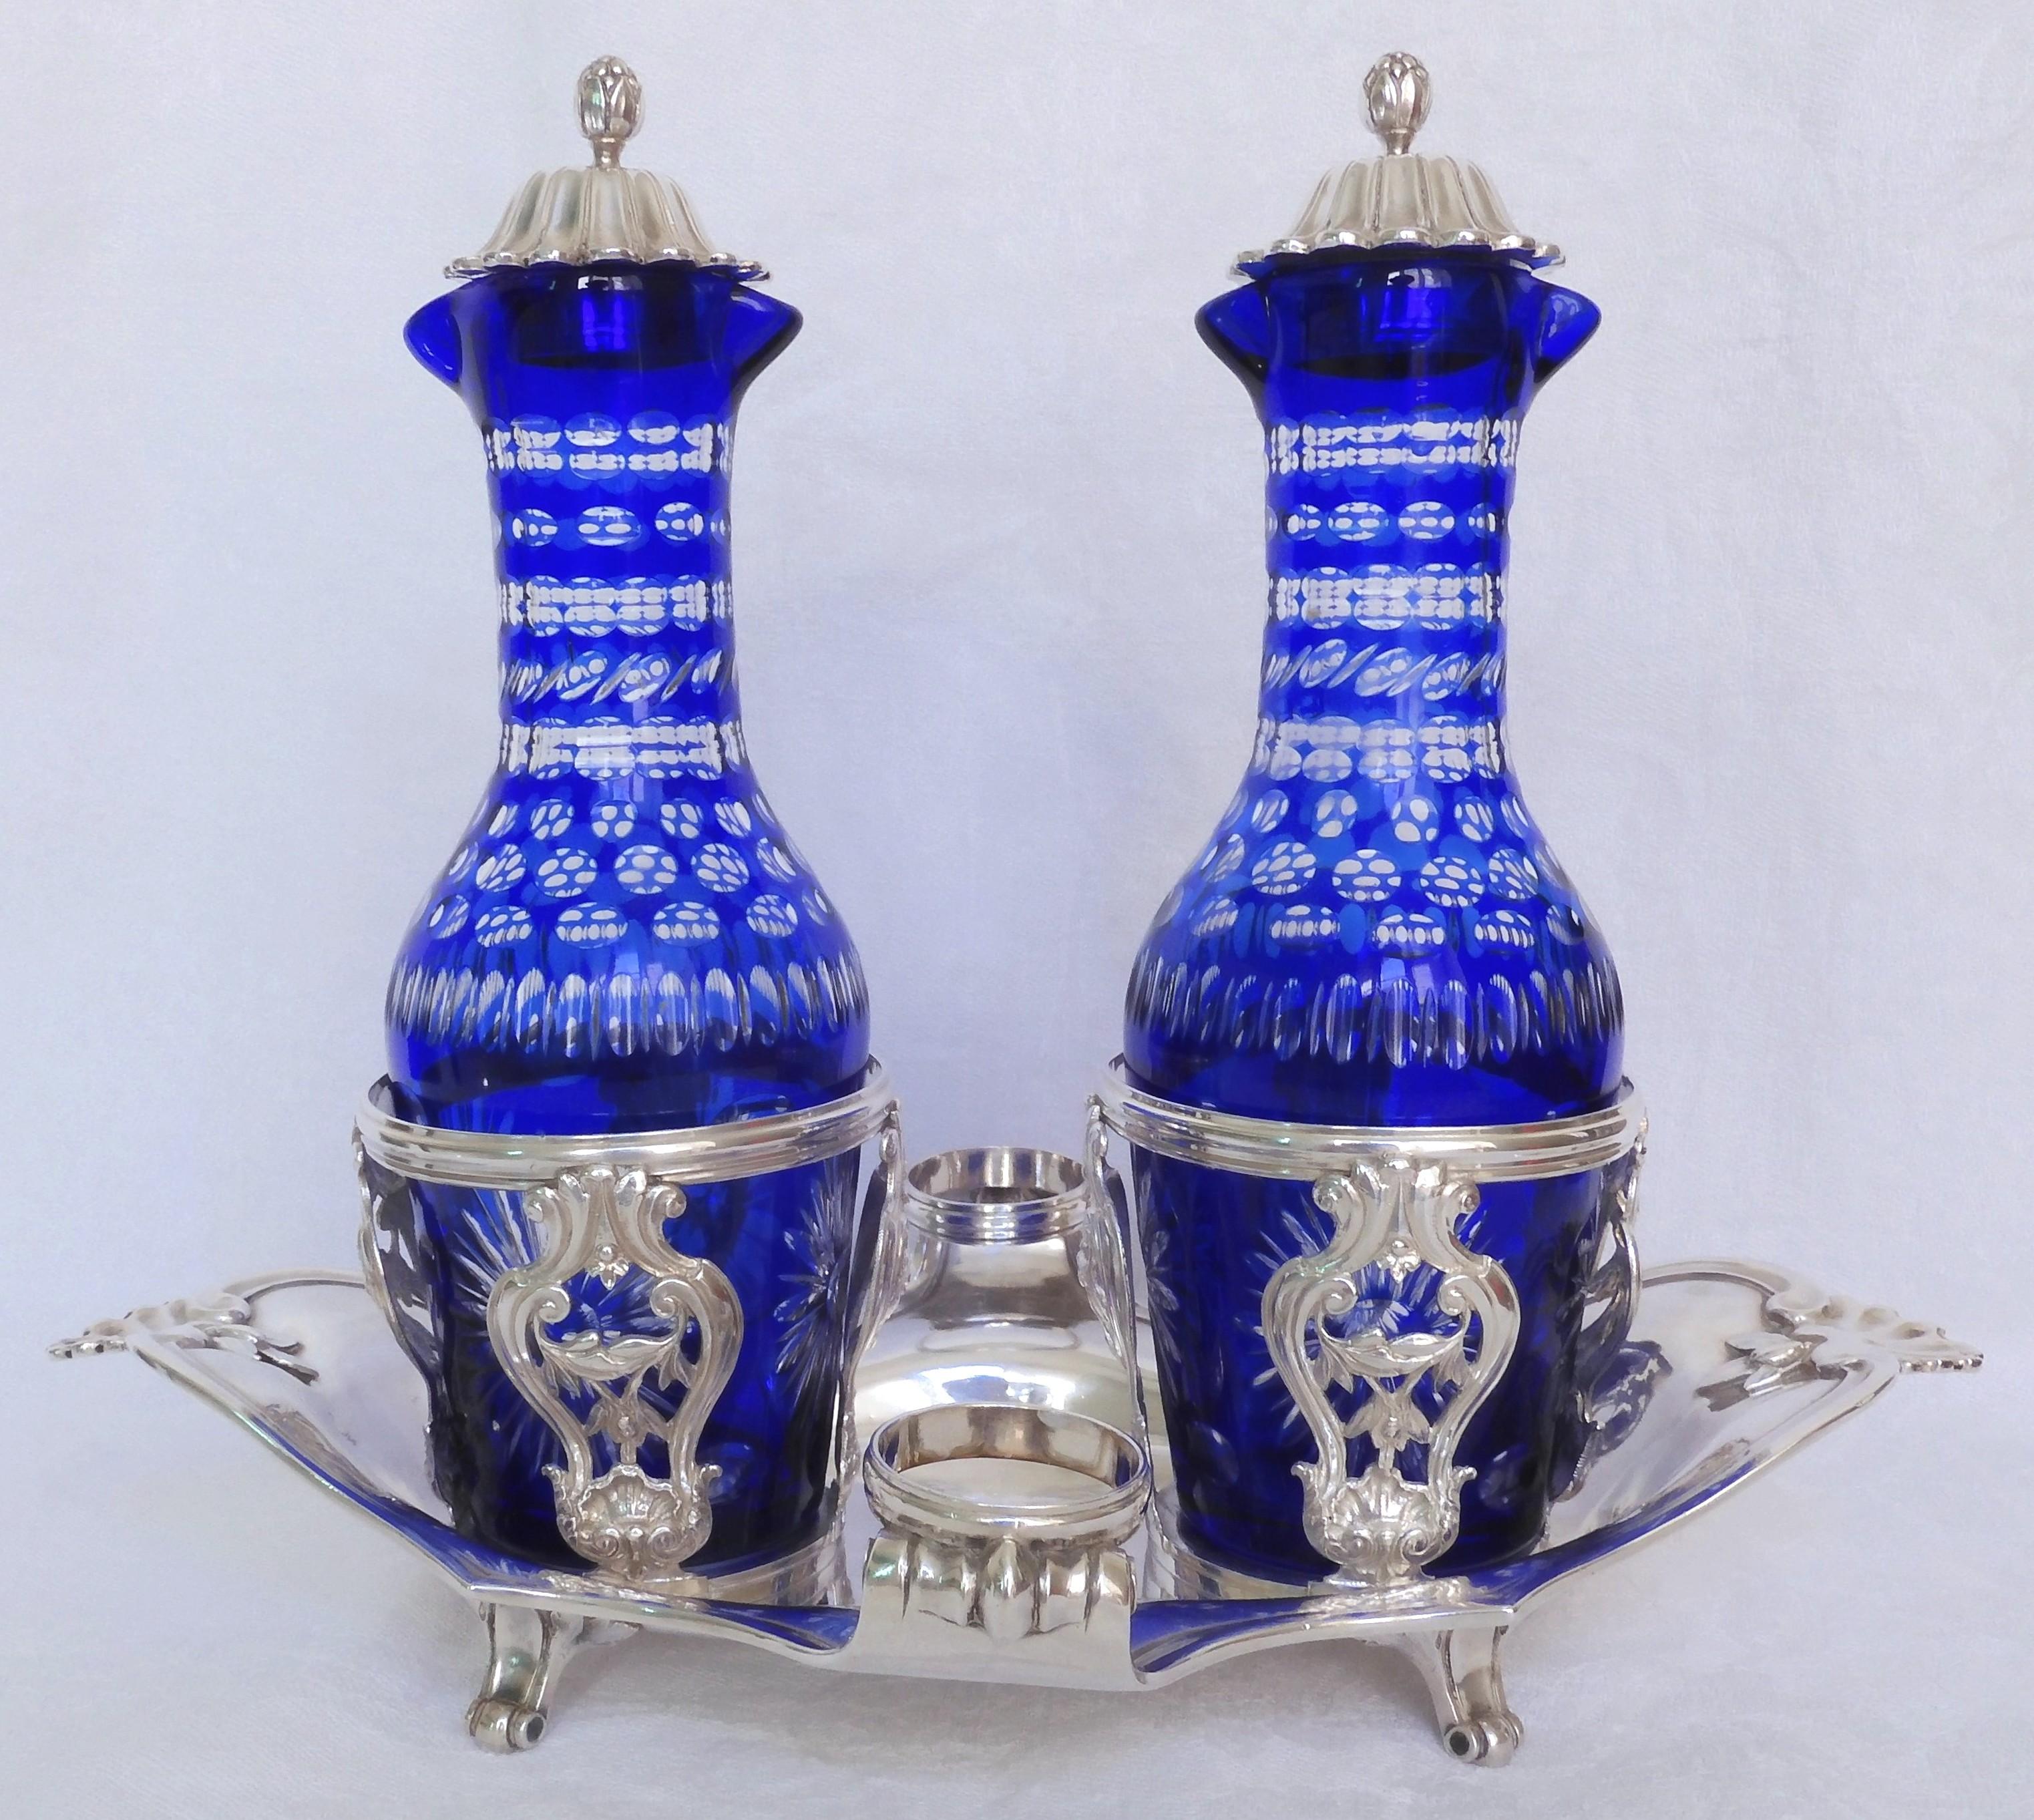 French antique sterling silver oil and vinegar set, Louis XV / Louis XVI production (18th century). Elegant shape, finely chiseled work decorated with shells and rococo patterns.

The two blue overlay crystal bottles were brought afterwards : they